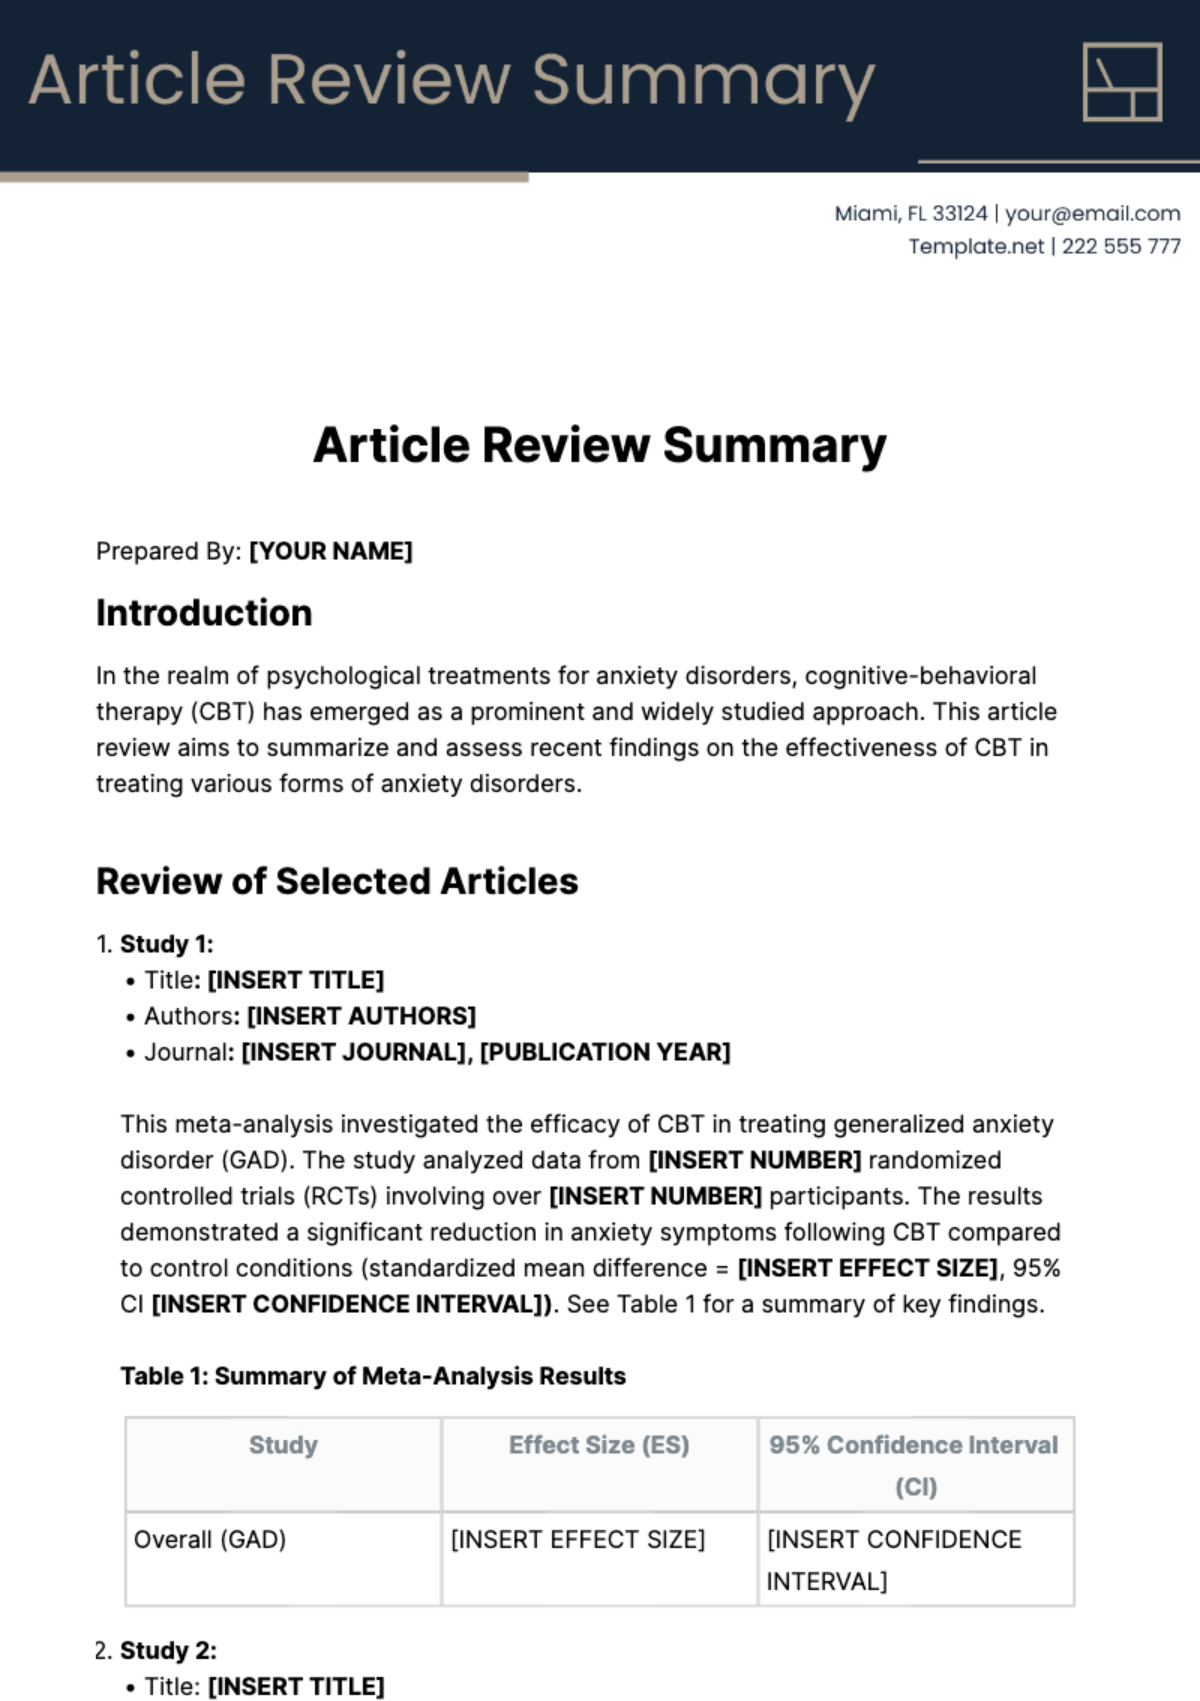 Article Review Summary Template